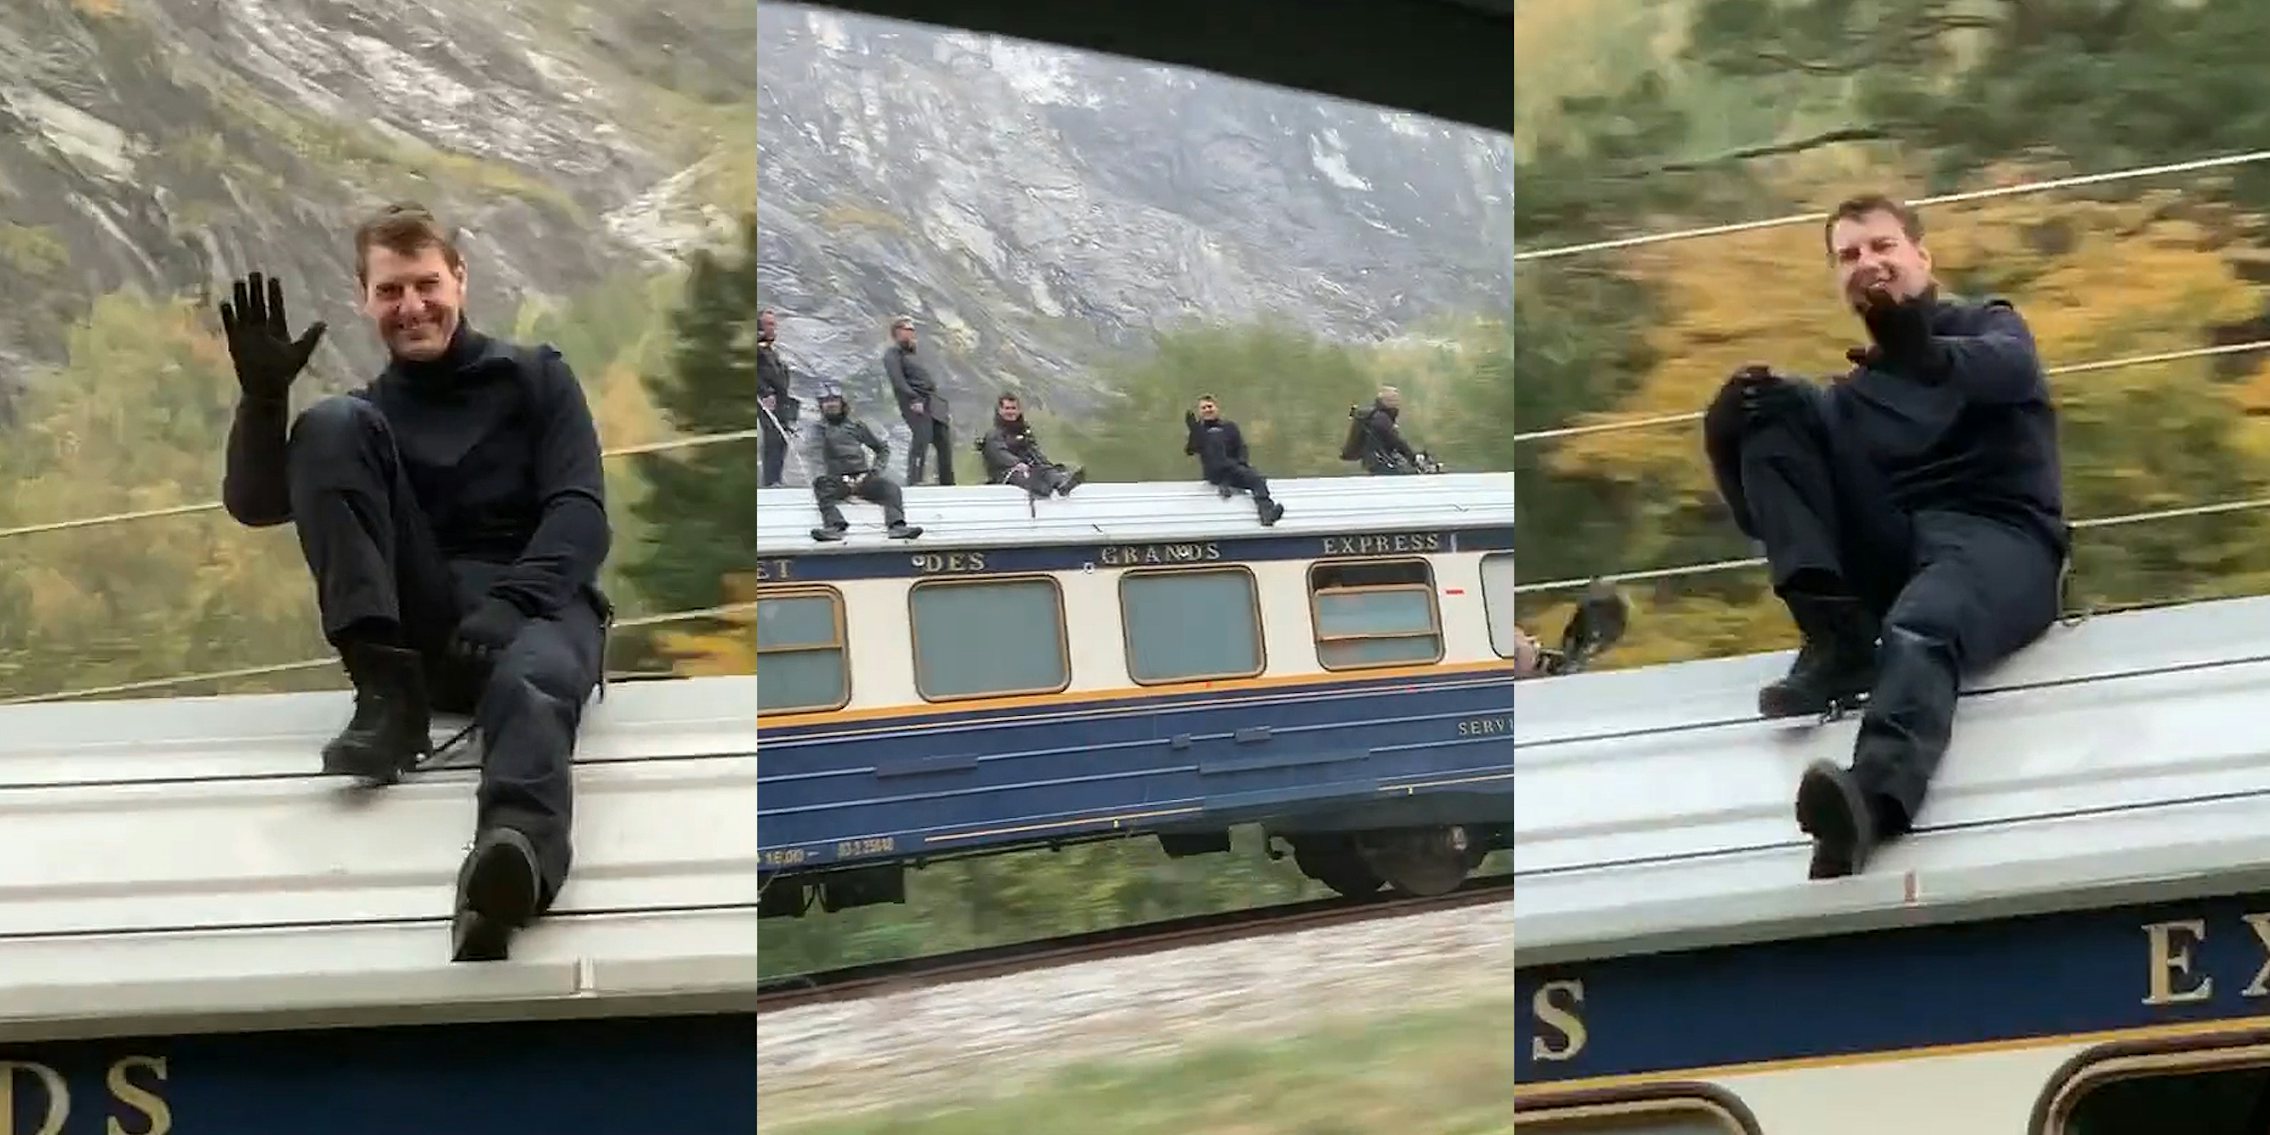 Tom Cruise and film crew on top of train in Norway (l) Tom Cruise and film crew on top of train in Norway (c) Tom Cruise and film crew on top of train in Norway (r)